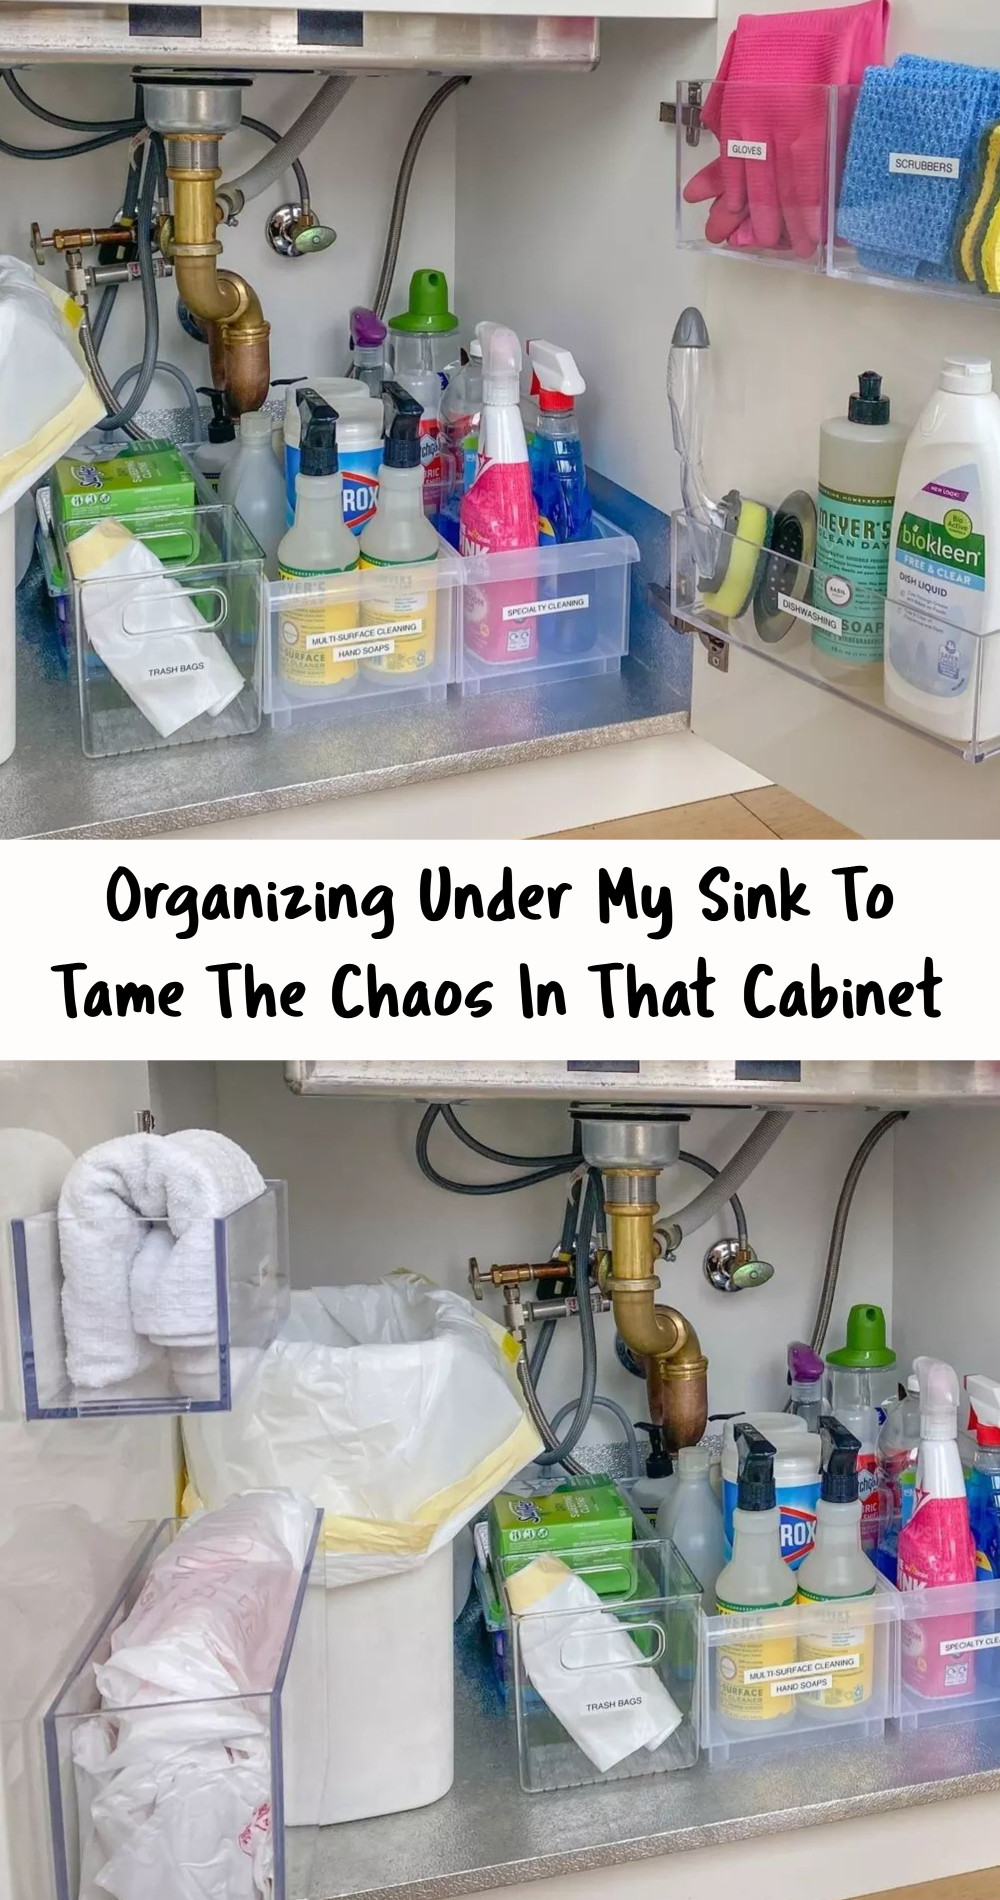 organizing under my sink to tame the clutter chaos in that kitchen cabinet